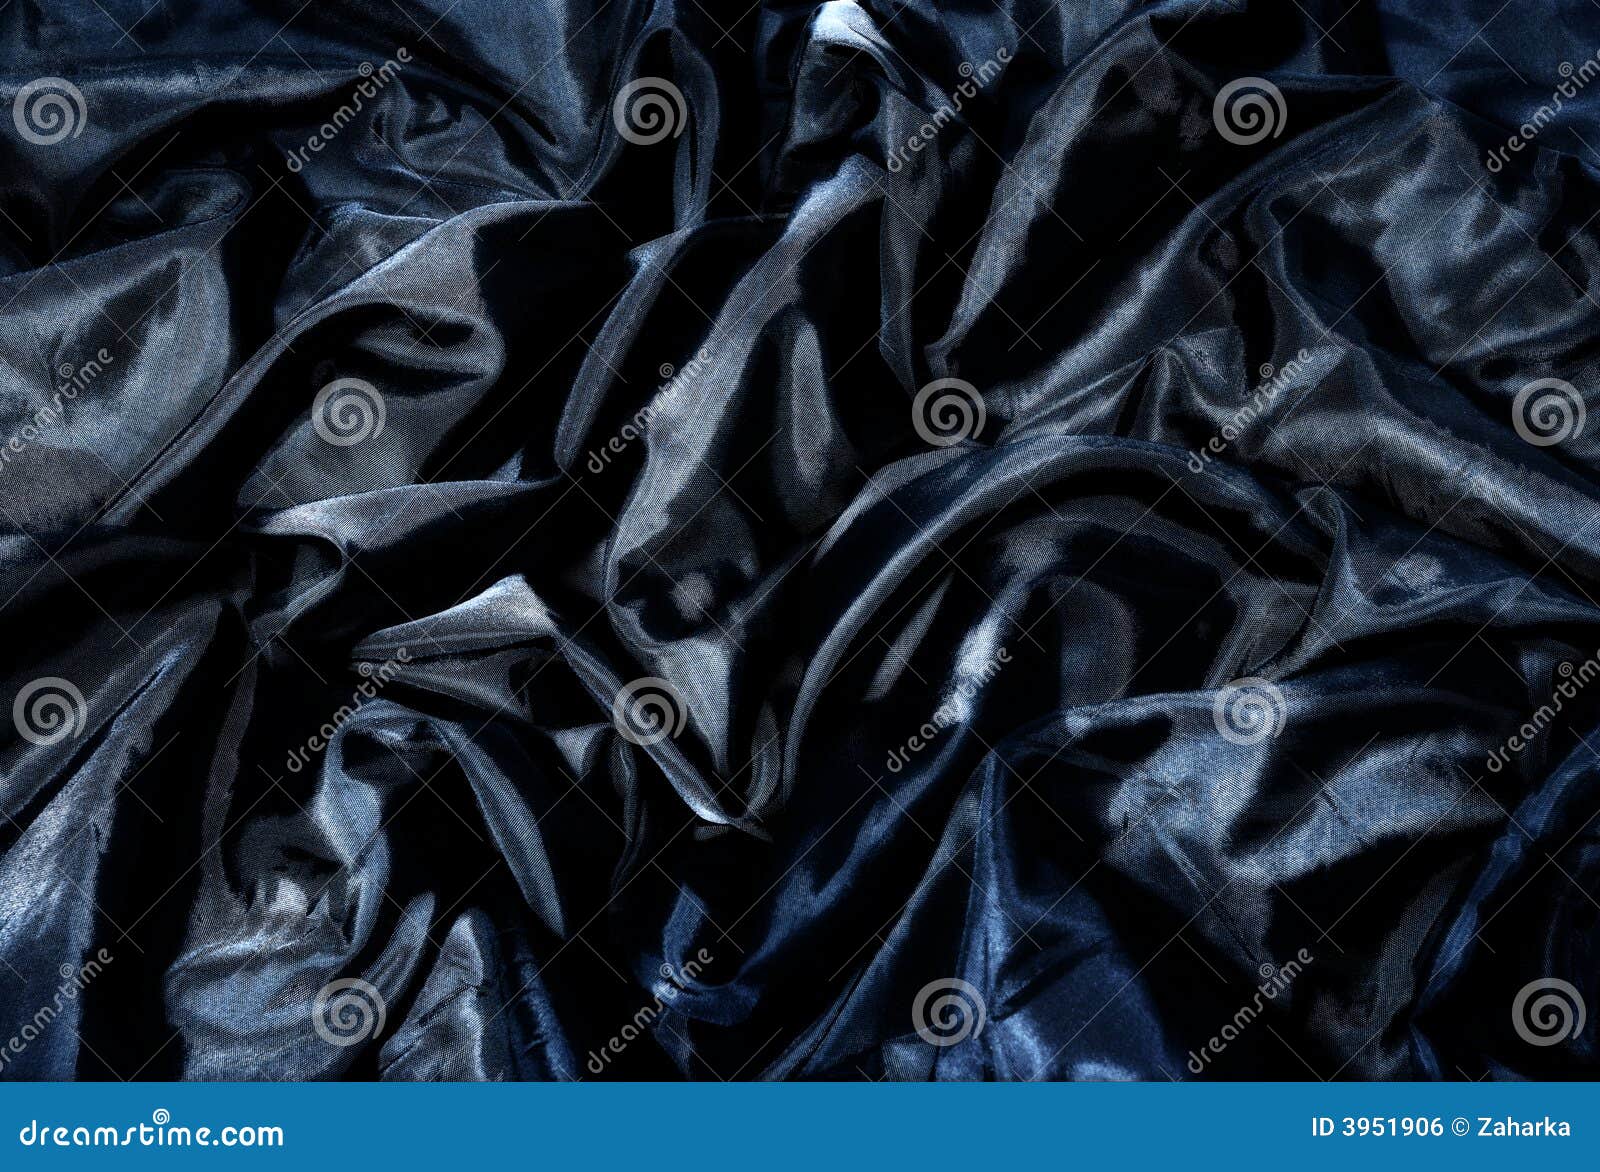 black textile fabric with creases and blue shine